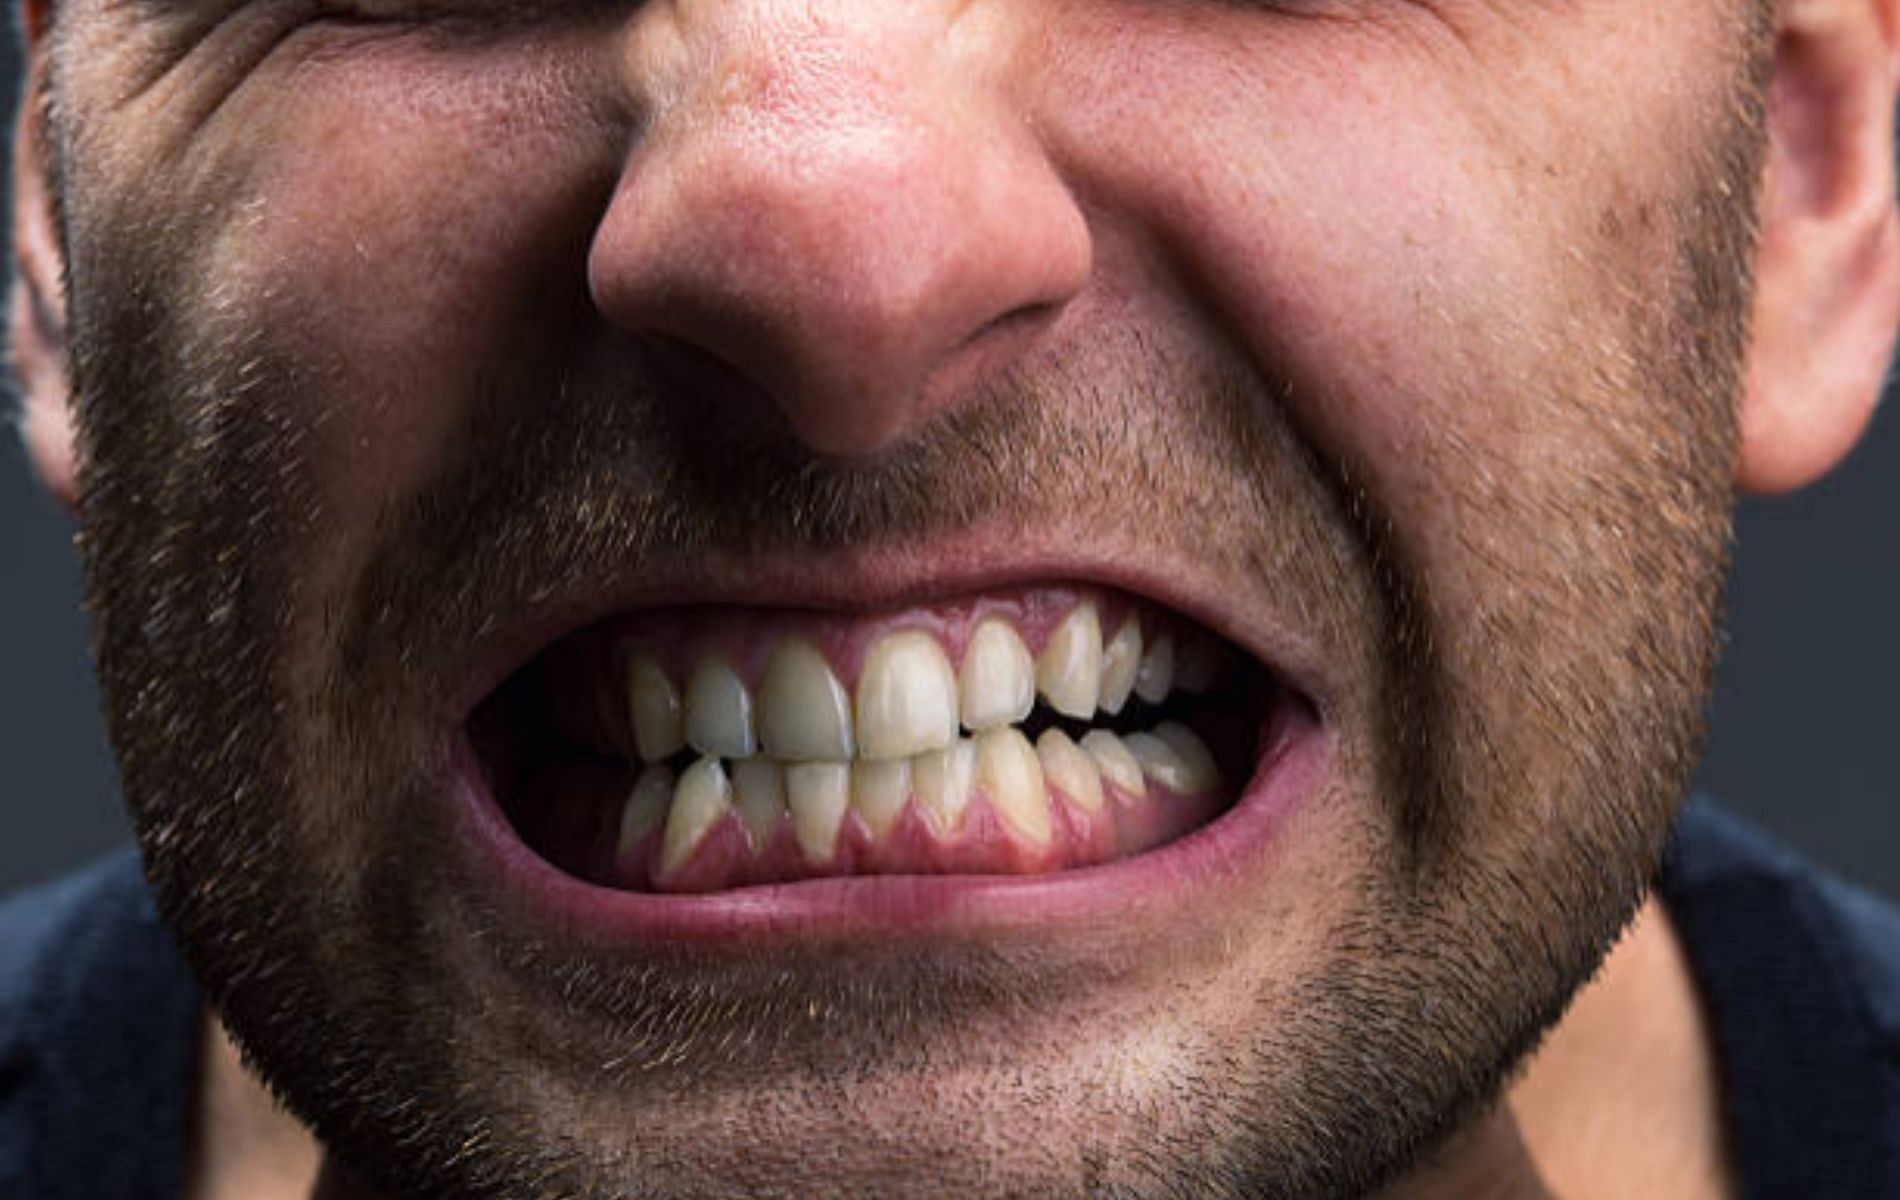 Jaw pain from stress is often a symptom of anxiety. (Image by iStockphoto via Pexels)